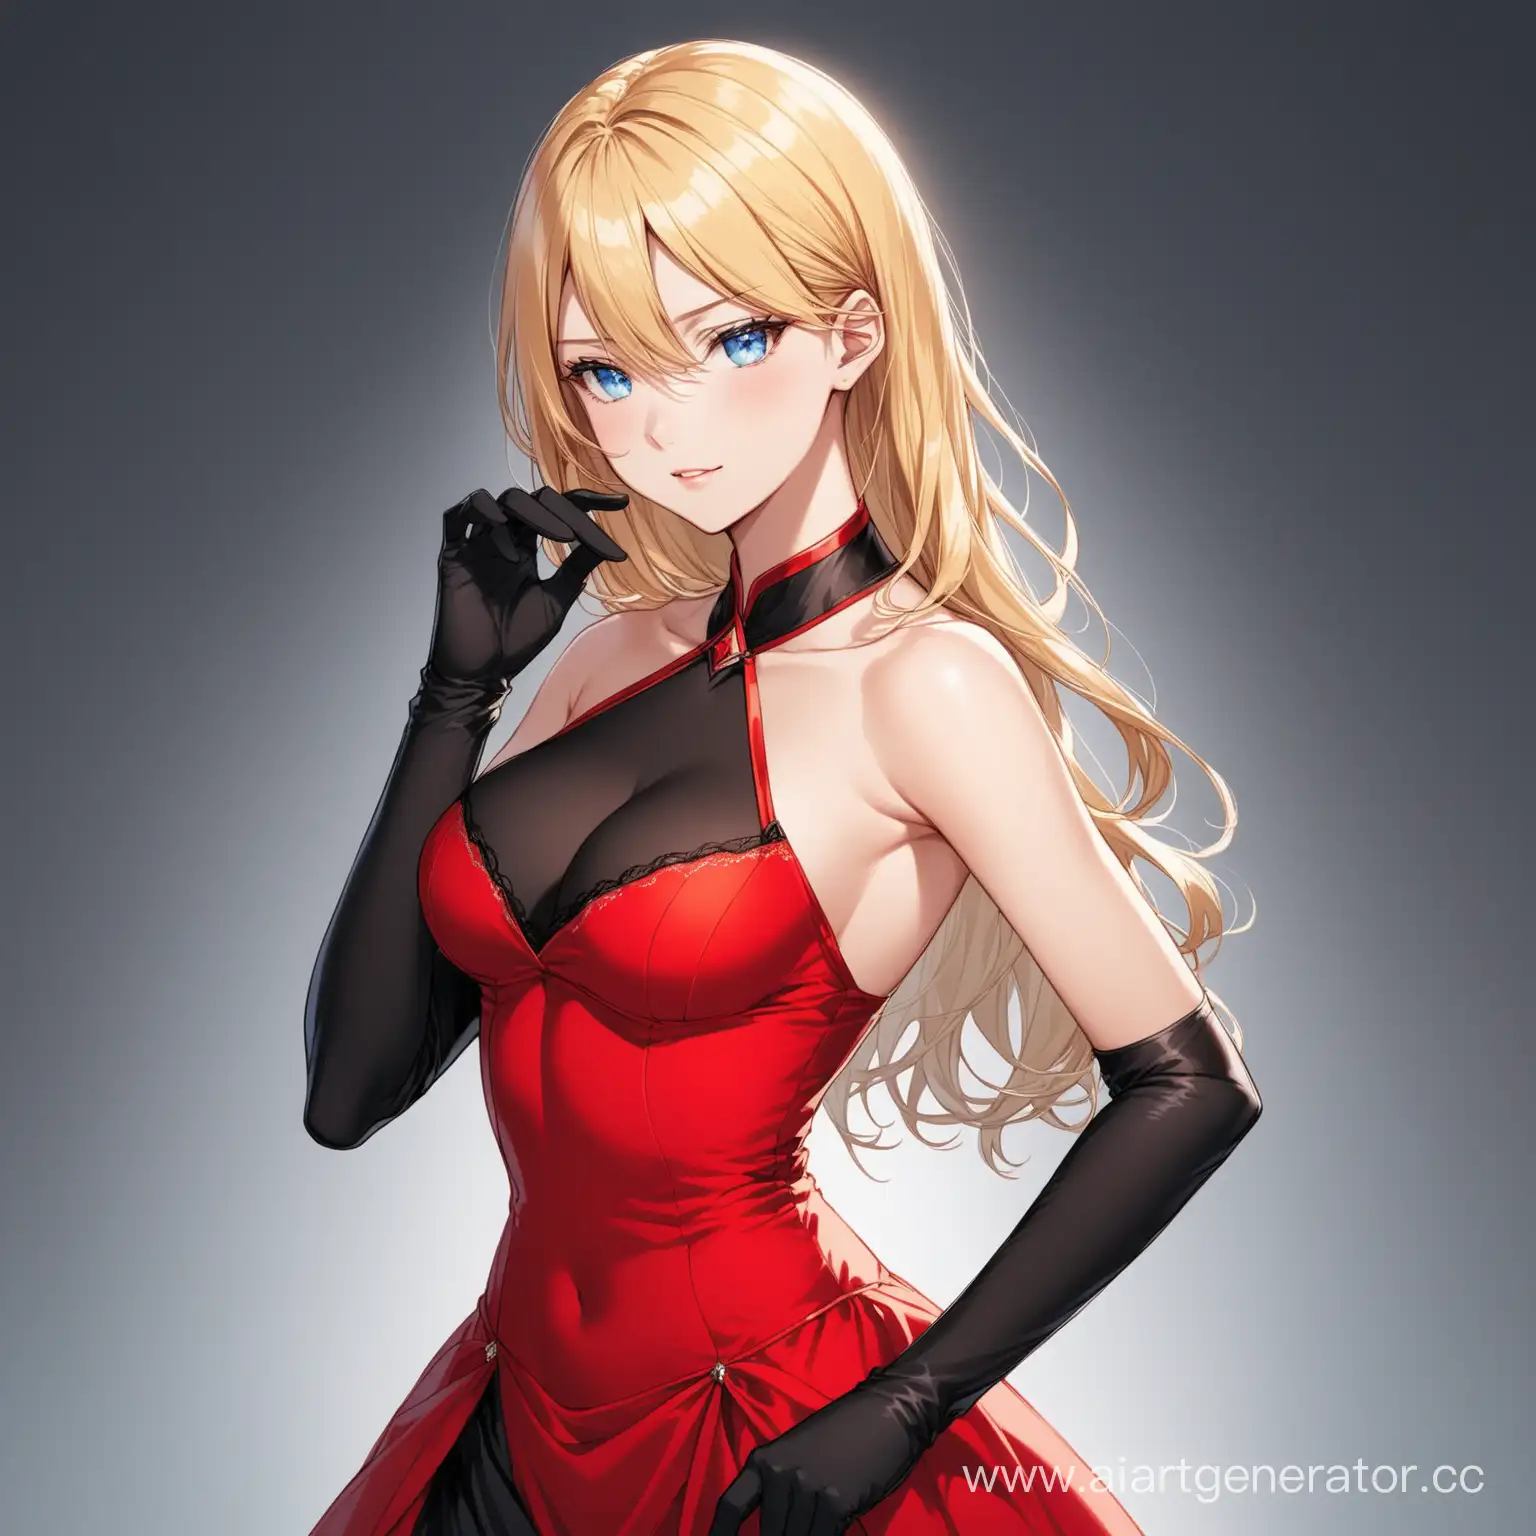 Elegant-Blonde-Woman-in-Red-and-Black-Dress-and-Gloves